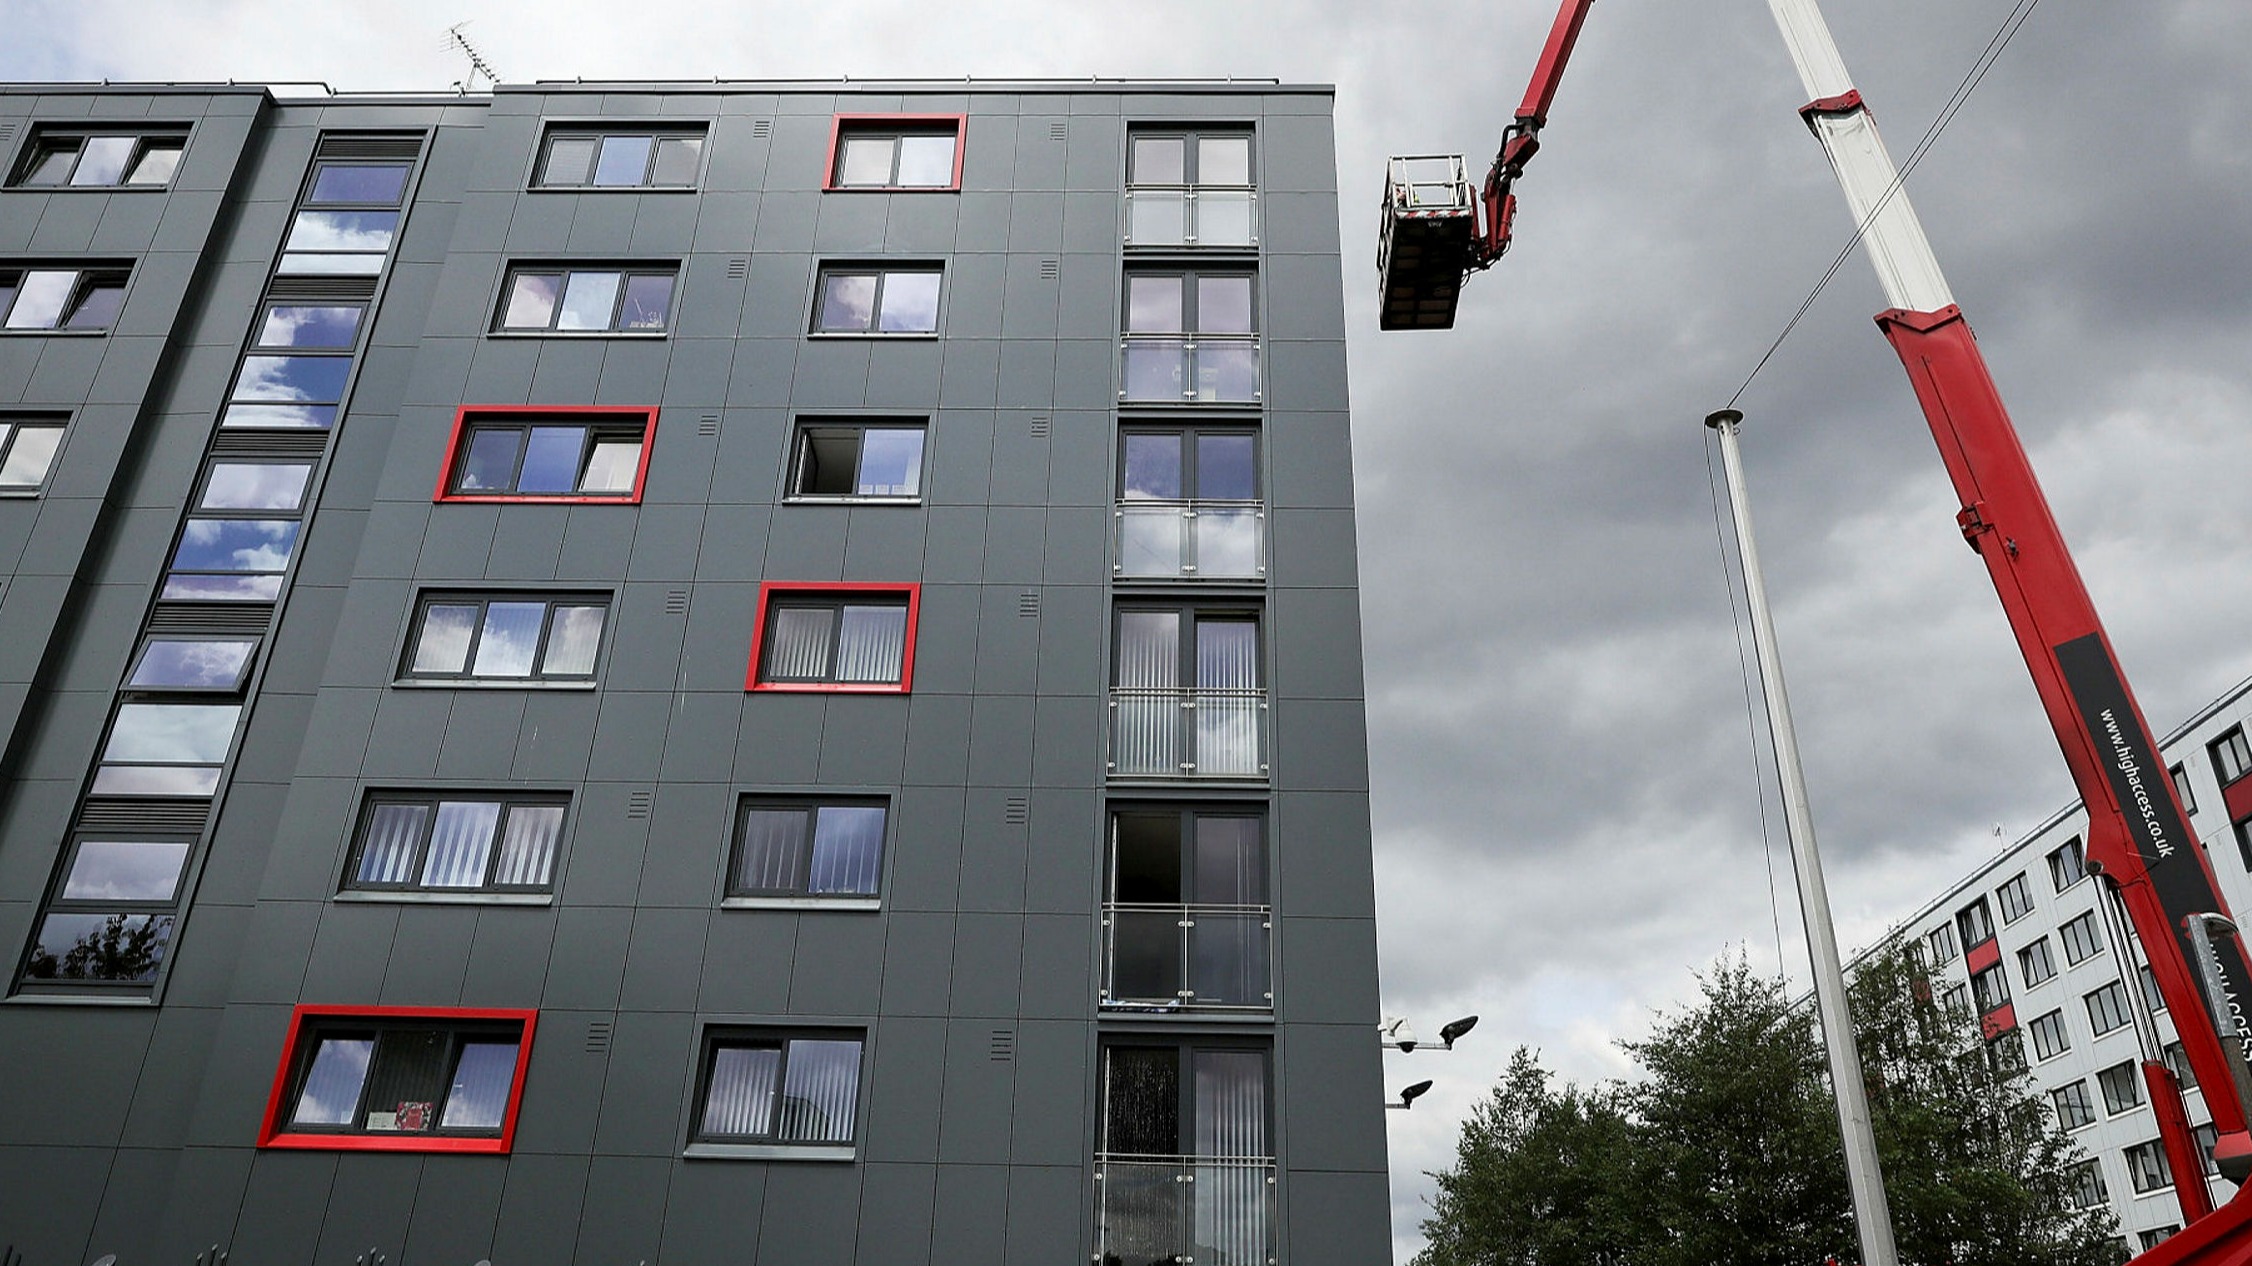 UK government: leaseholders won’t have to pay for fire risk repairs.